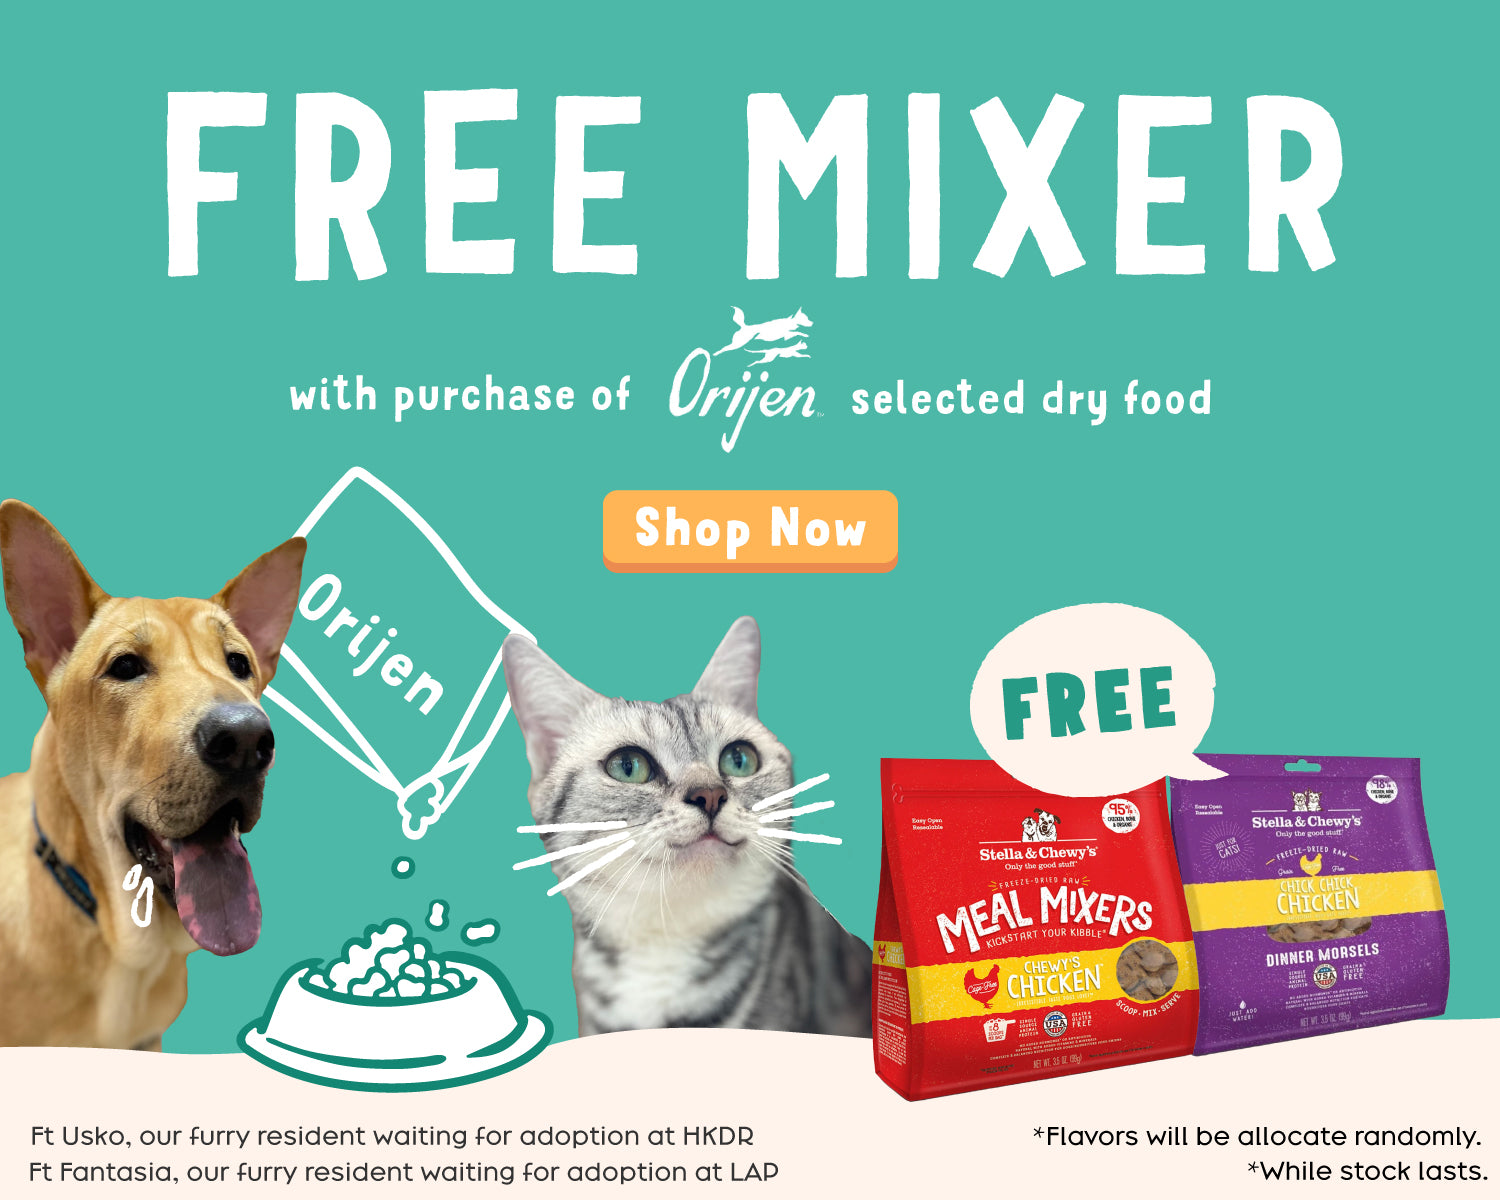 free mixer with purchase of orijen selected dry food